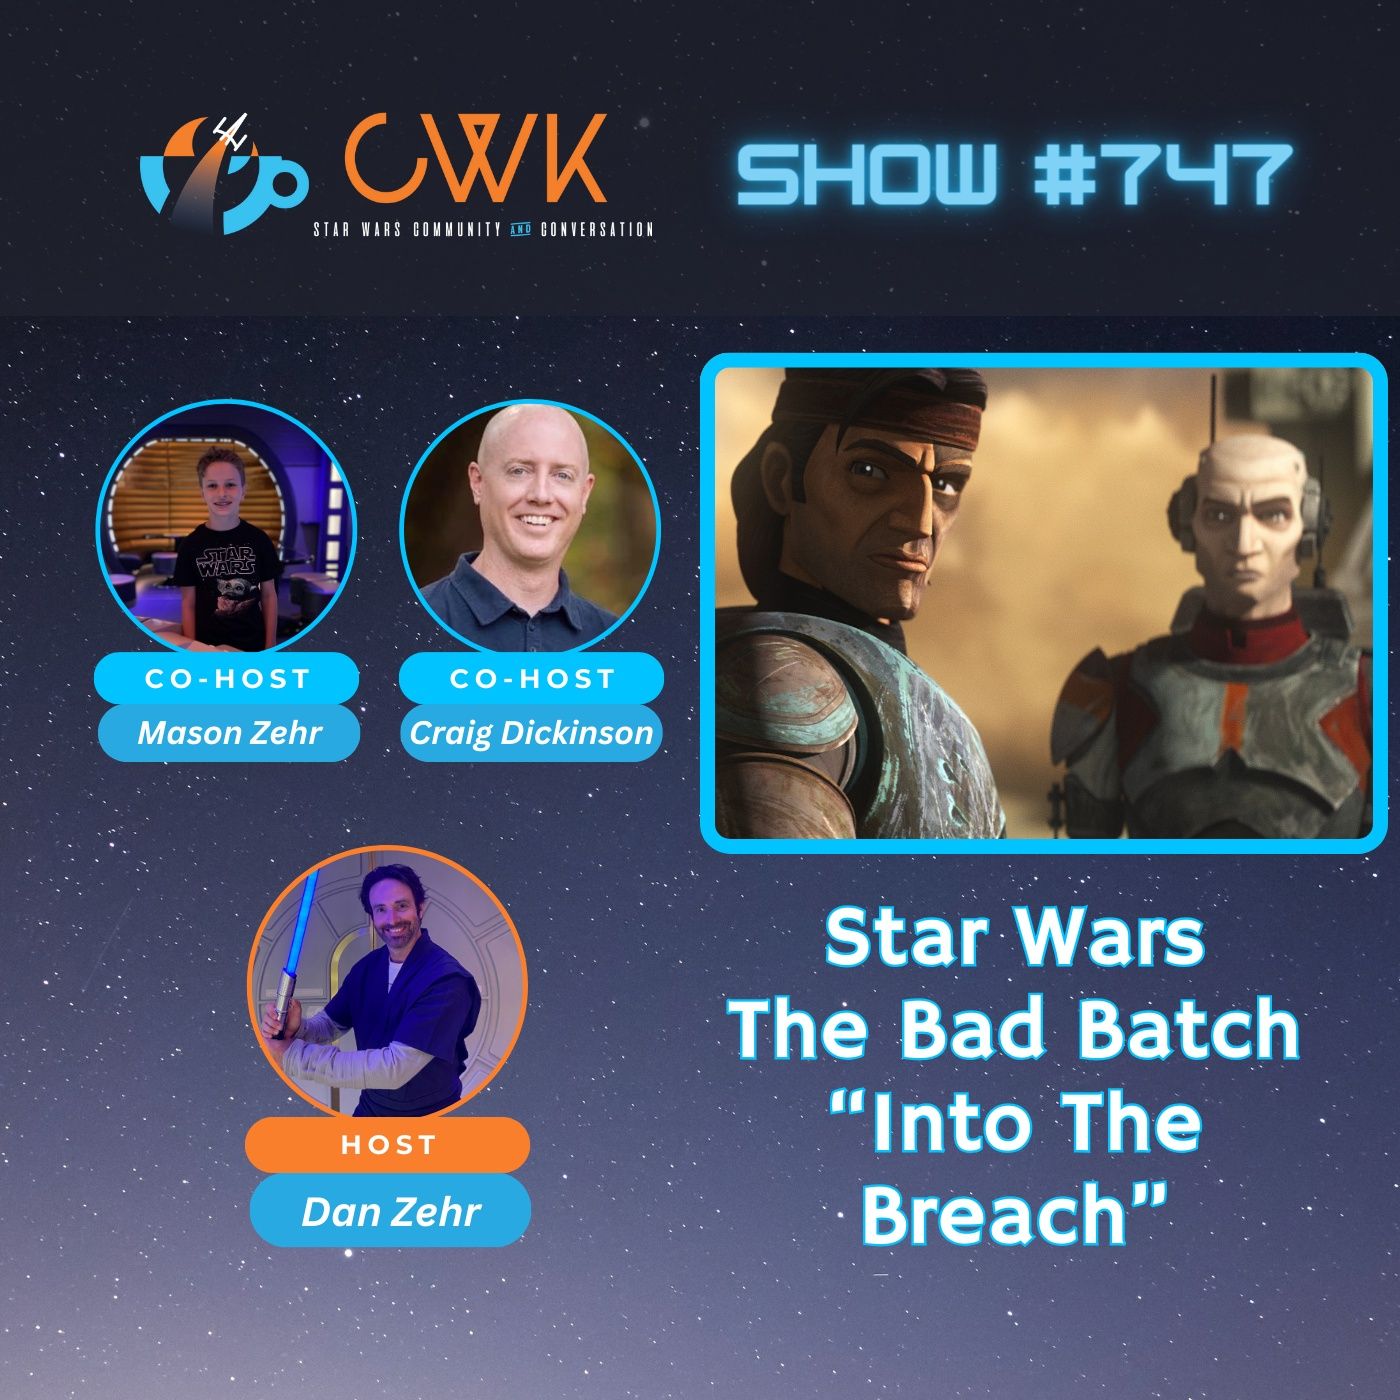 CWK Show #747: The Bad Batch- “Into The Breach"